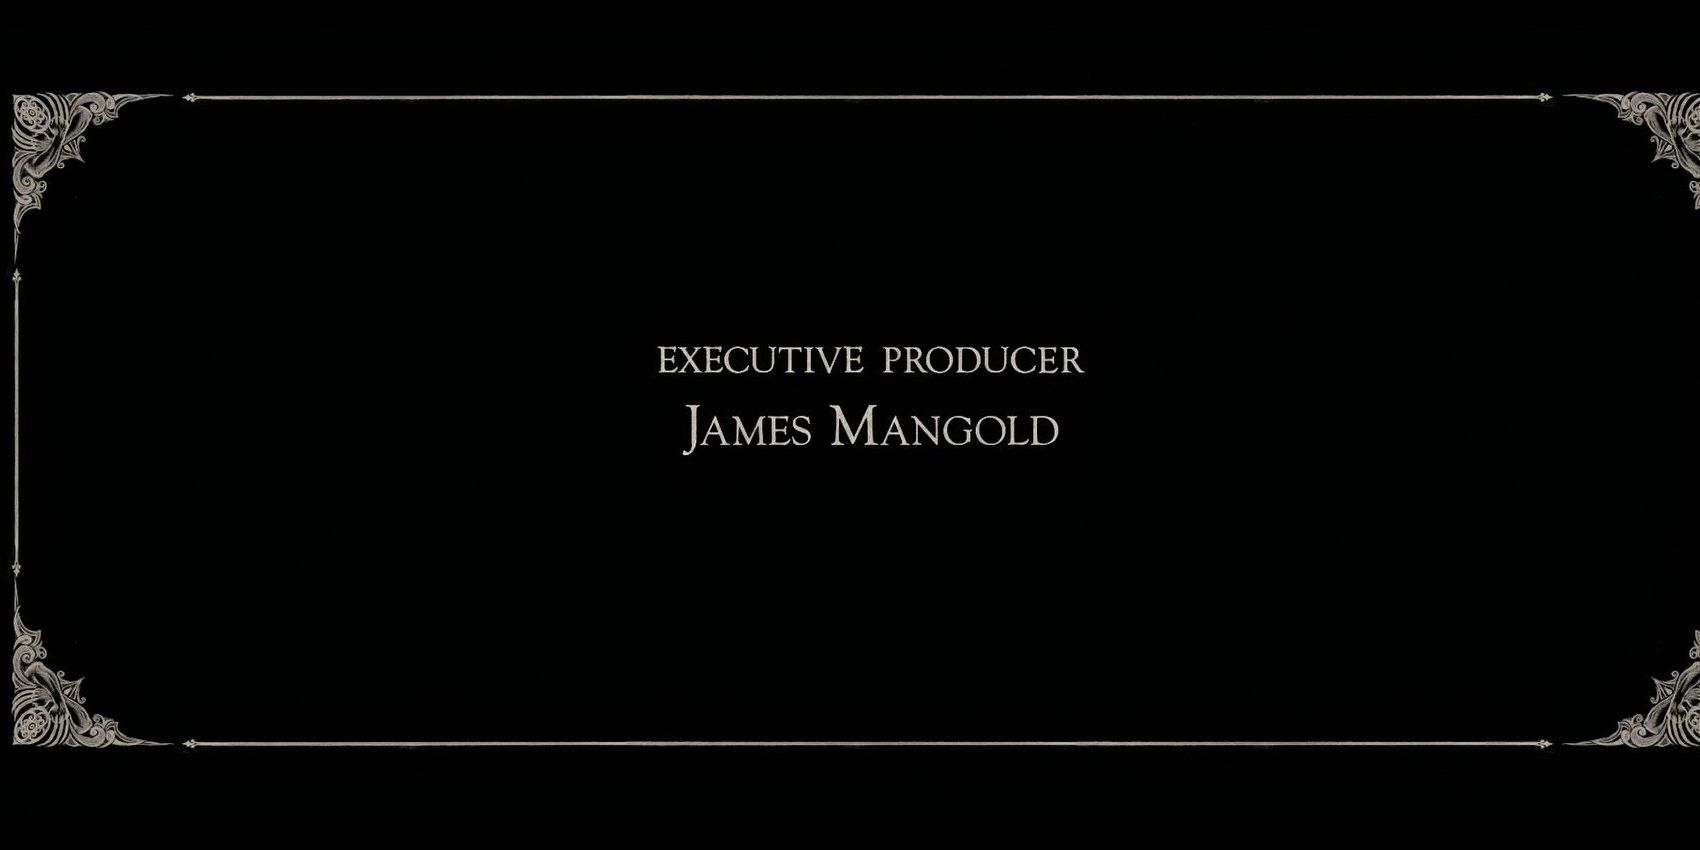 James Mangold in credits